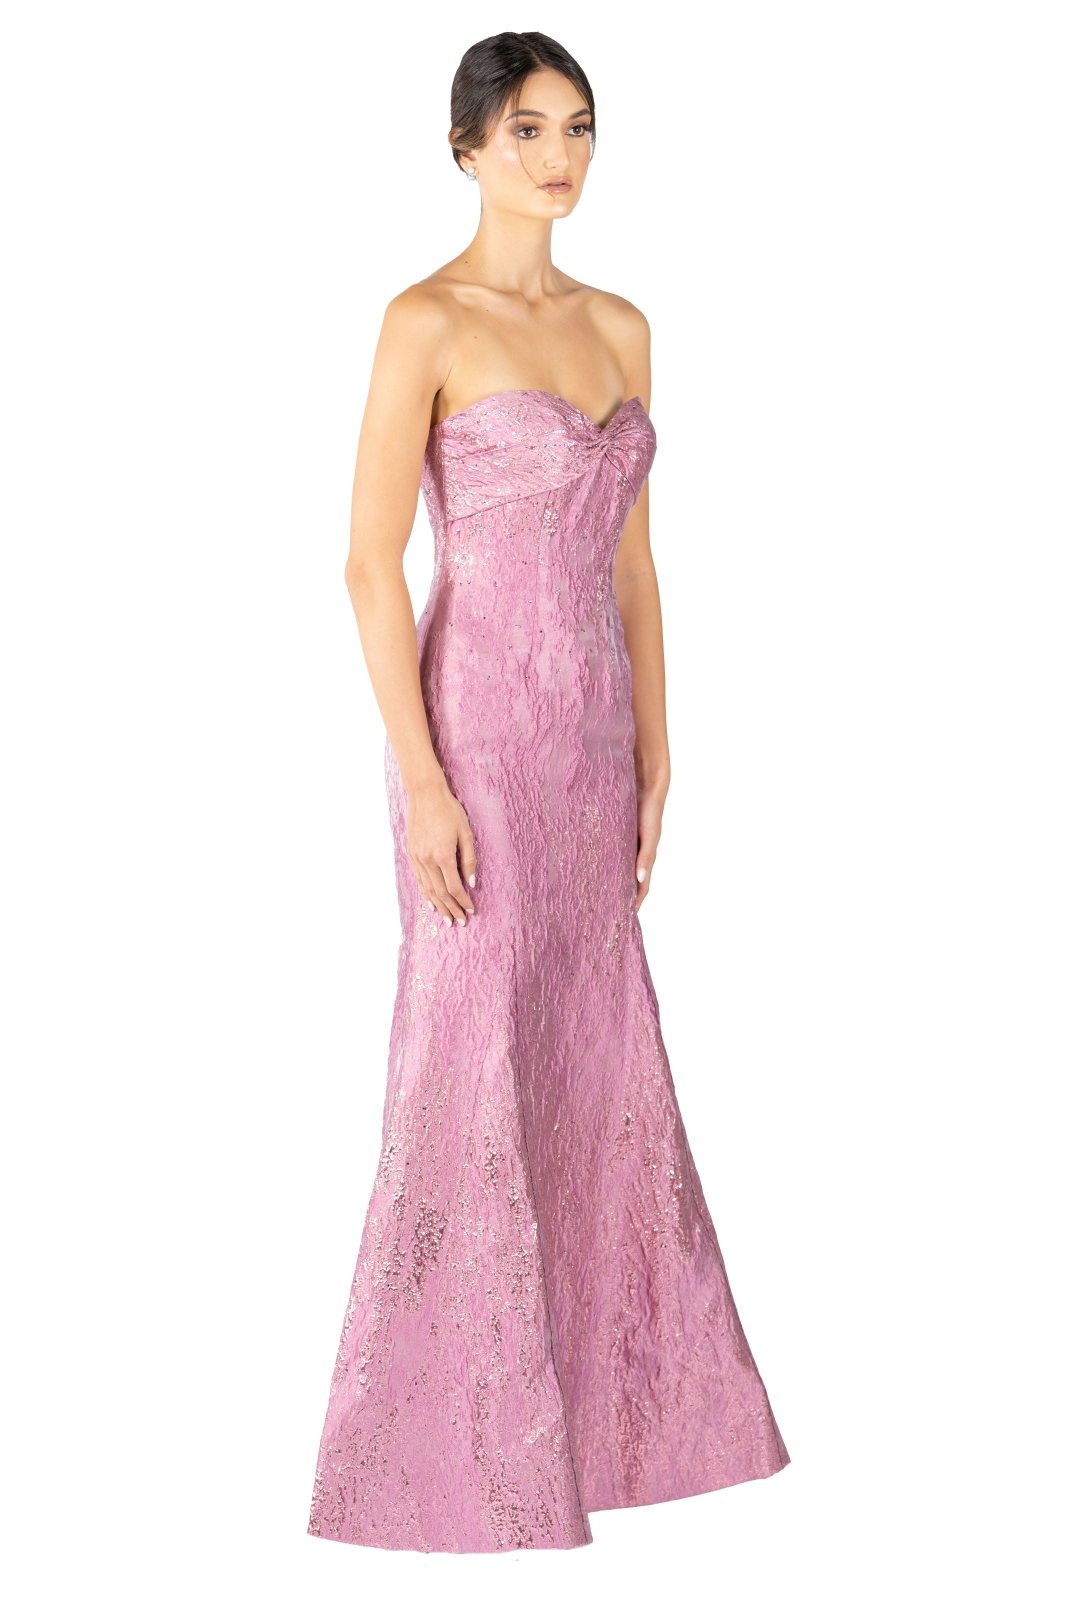 Strapless Fit and Flare Brocade Gown  